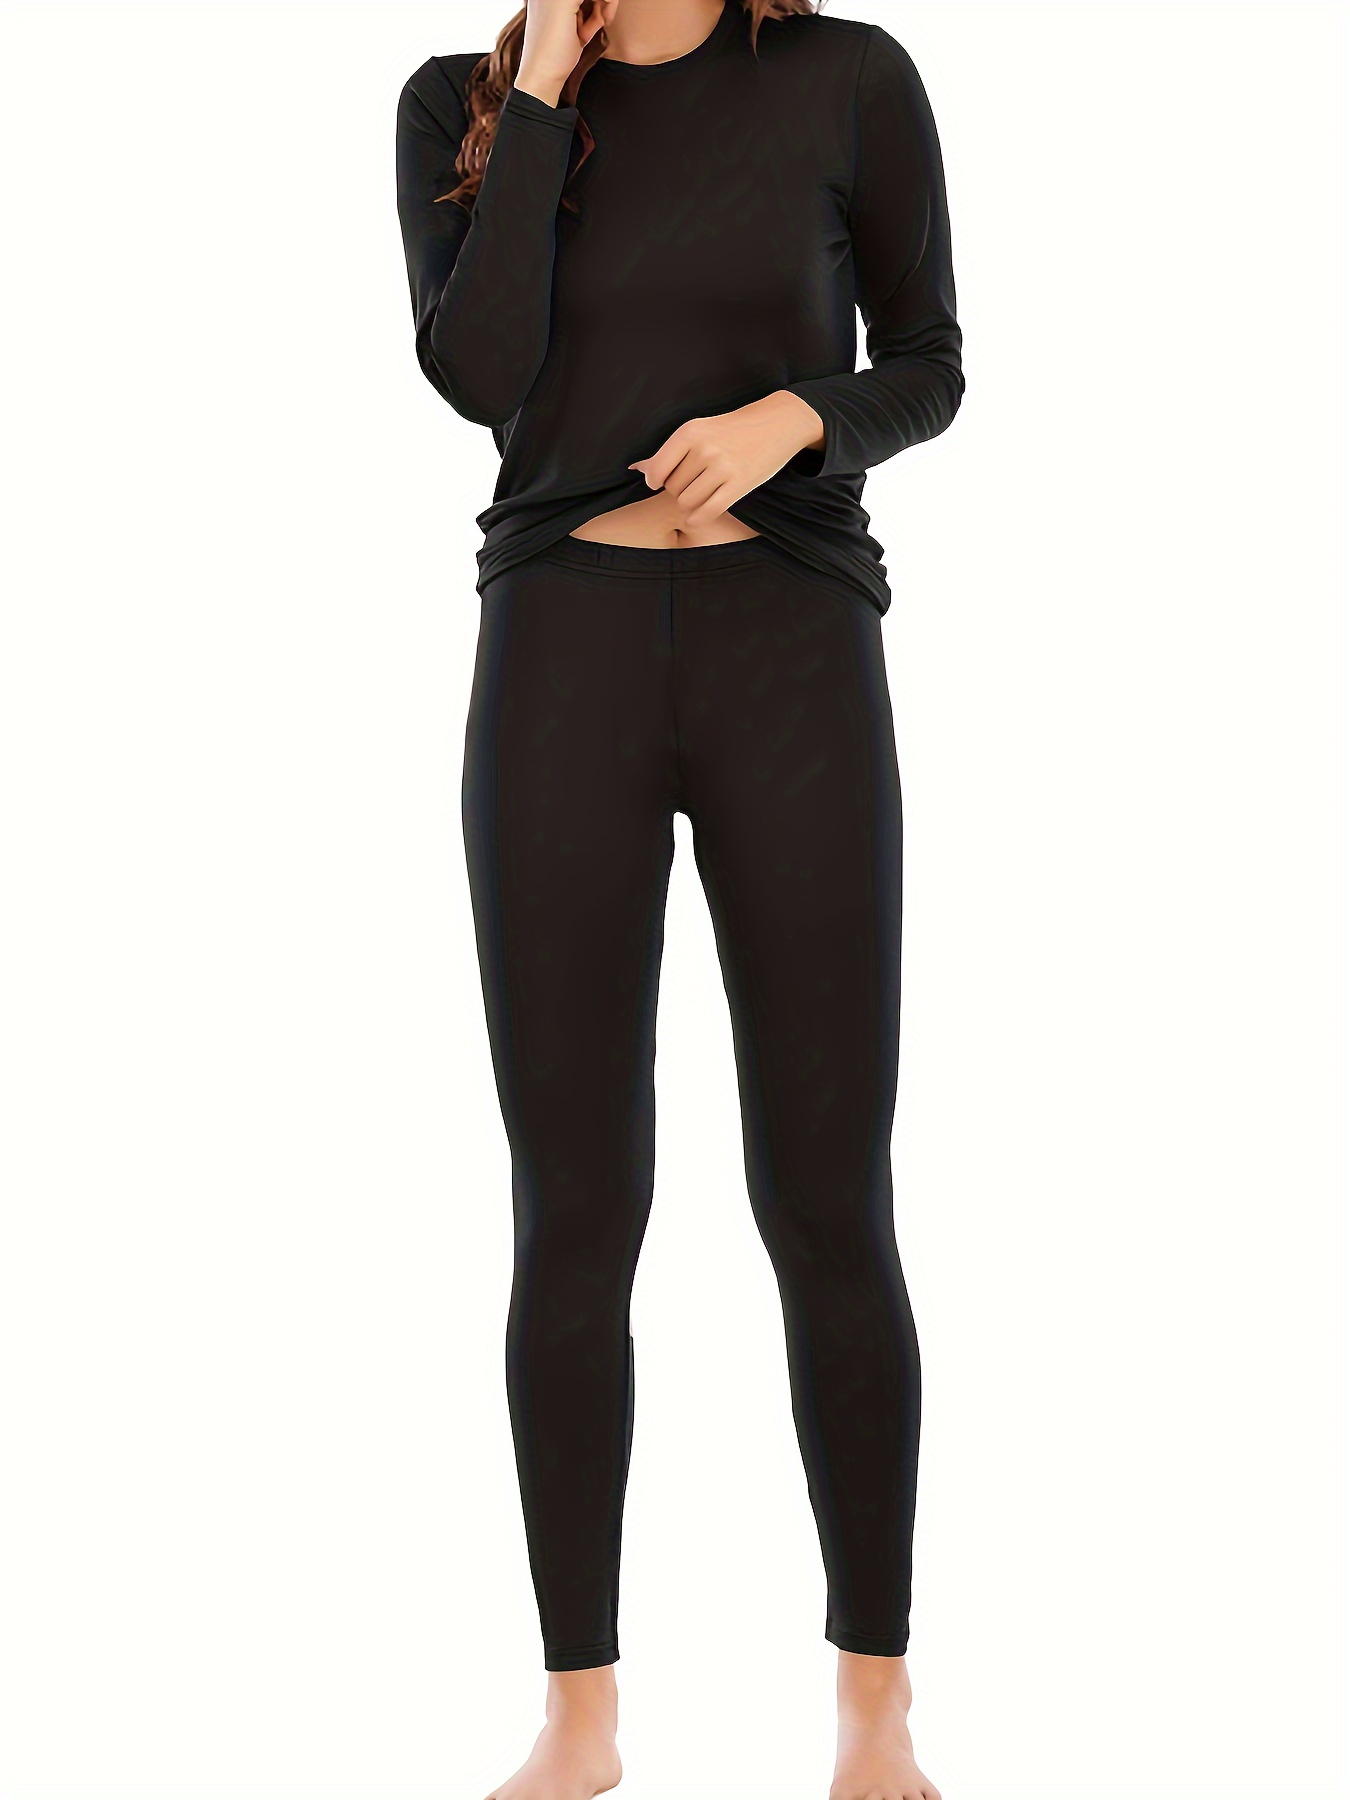 Women's Simple Thermal Underwear, Plus Size Solid Fleece Lined Long Sleeve  Base Layer Top